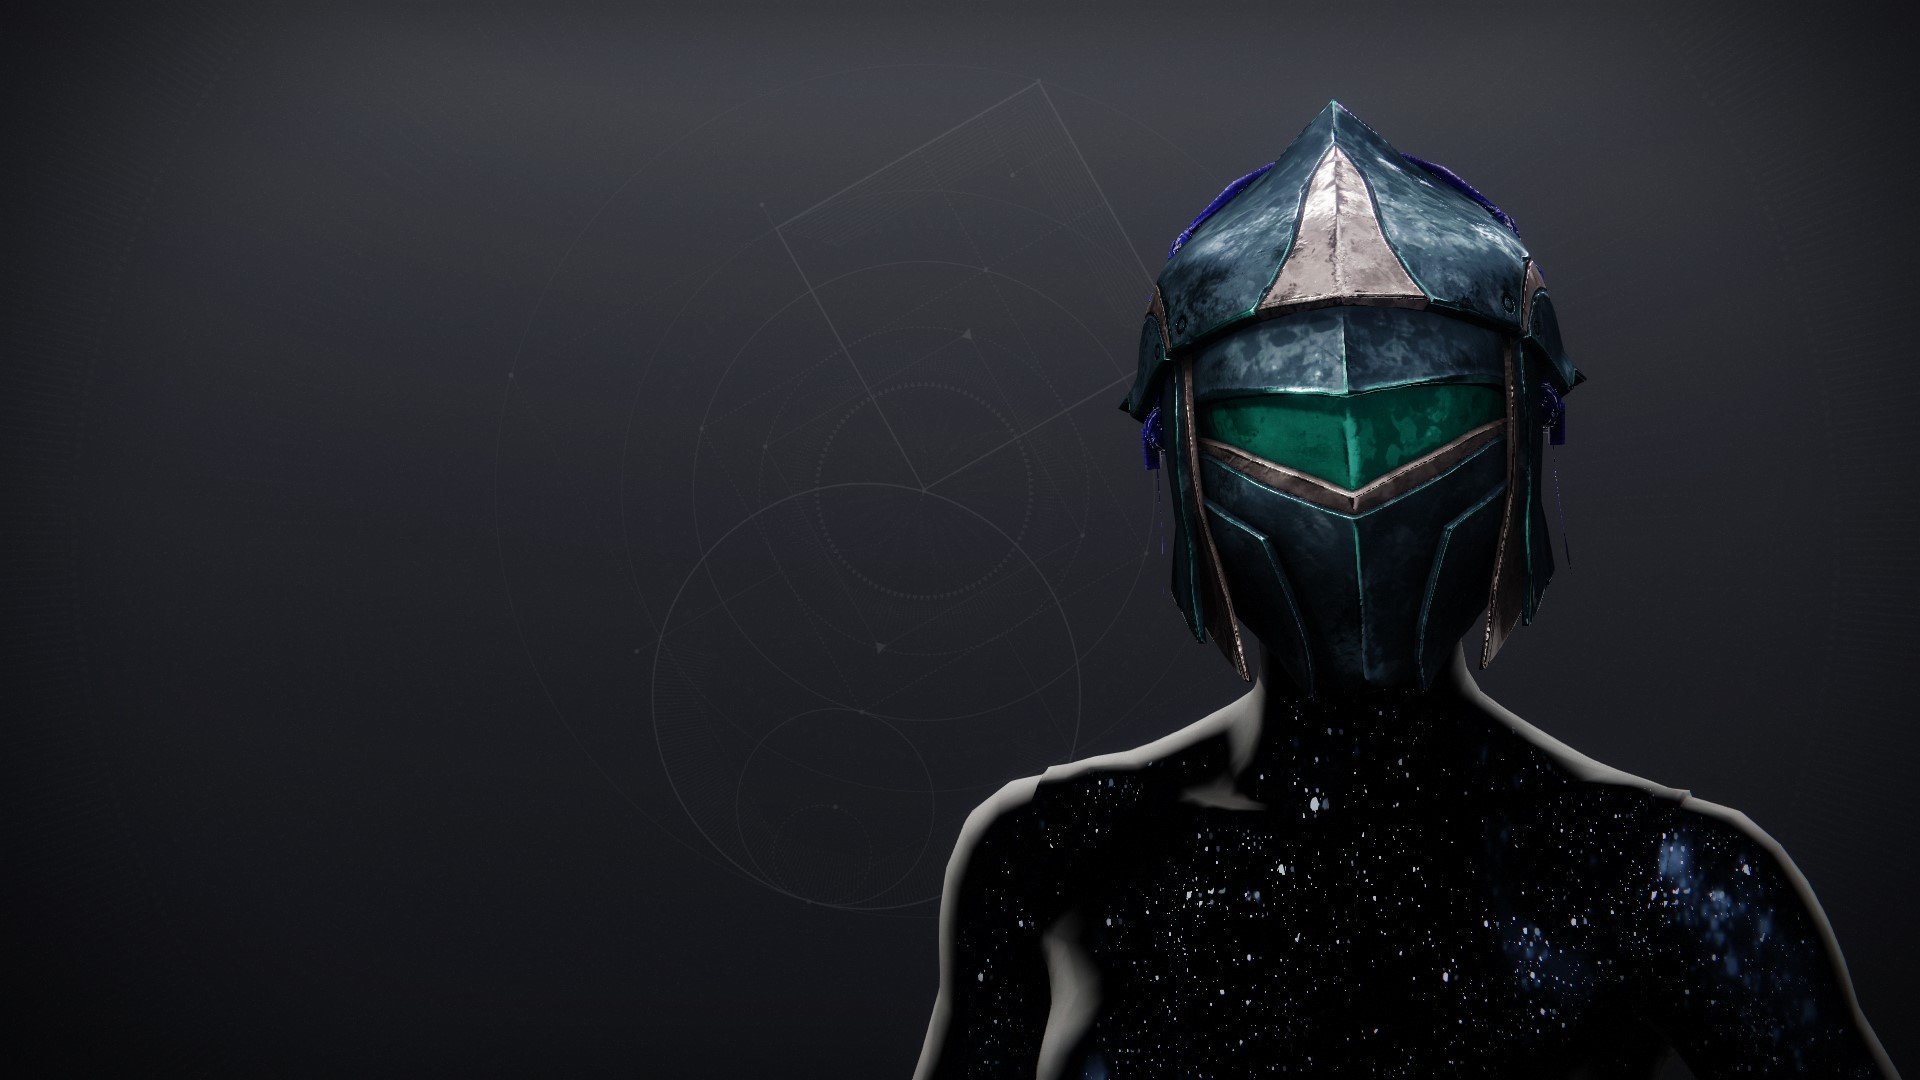 An in-game render of the Wyrmguard Helm.